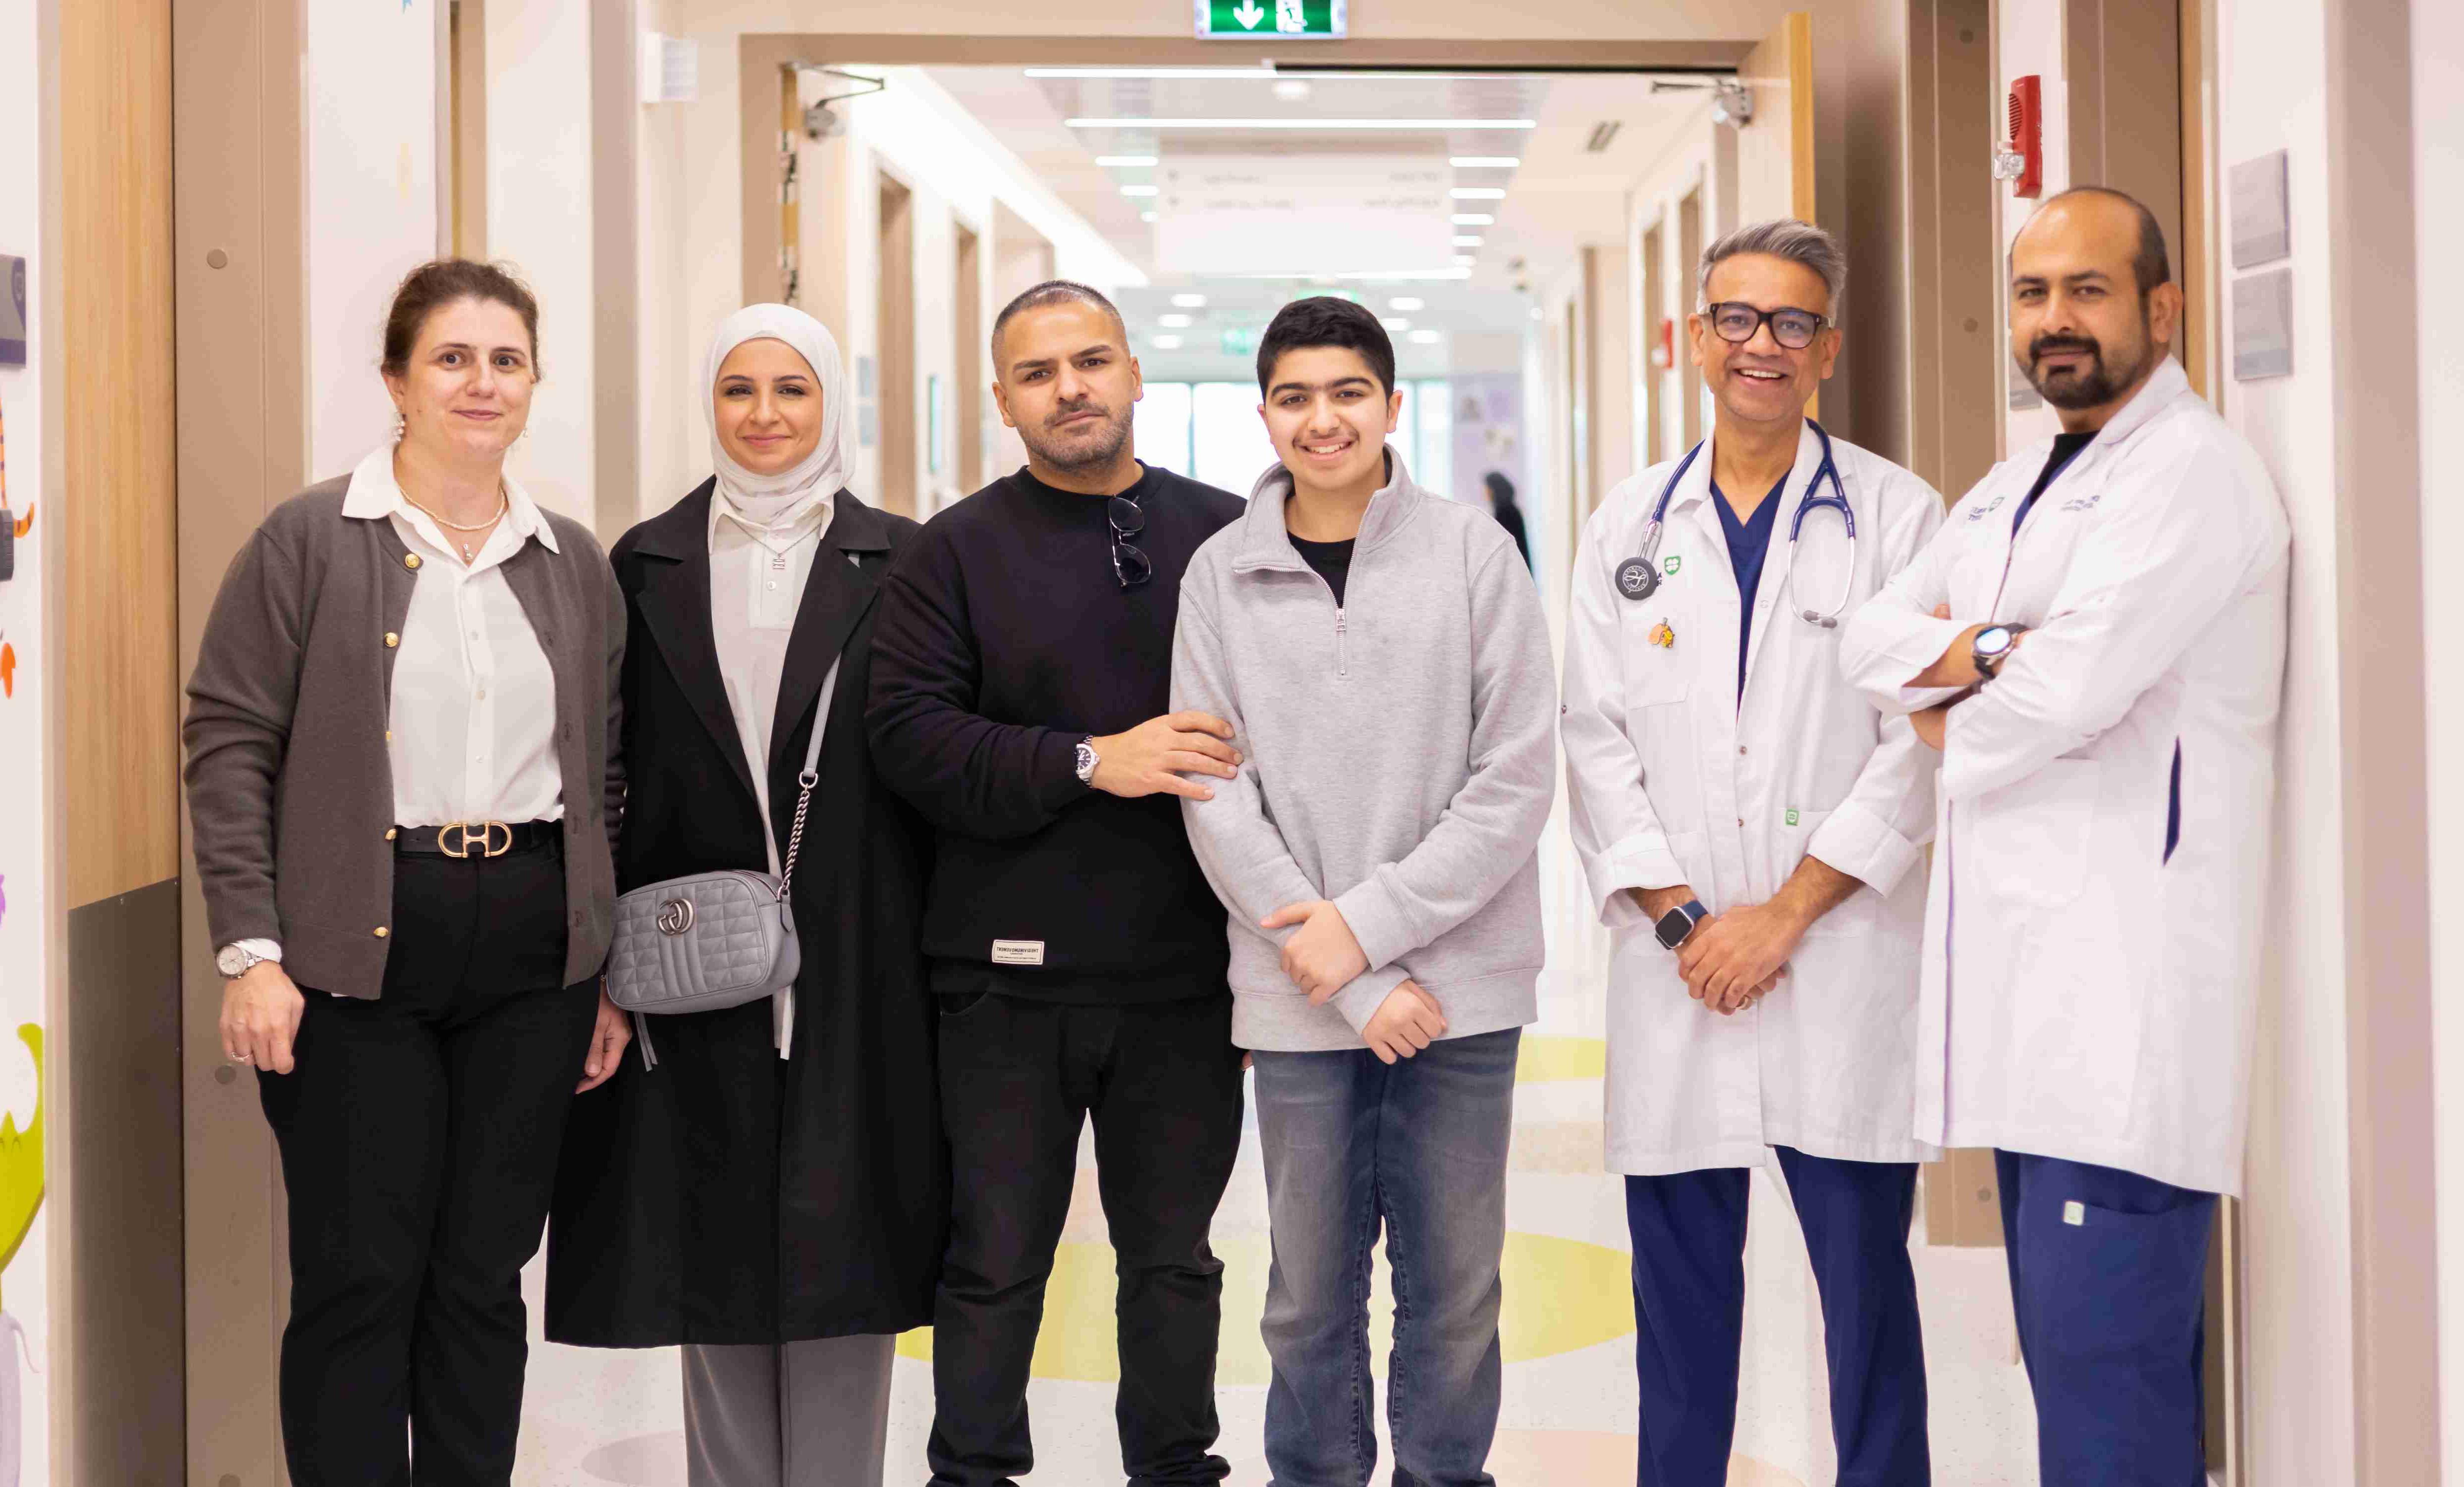 The right expertise and multi- disciplinary care at 迪拜美国医院 helped a young Kuwaiti boy's life return to normal.